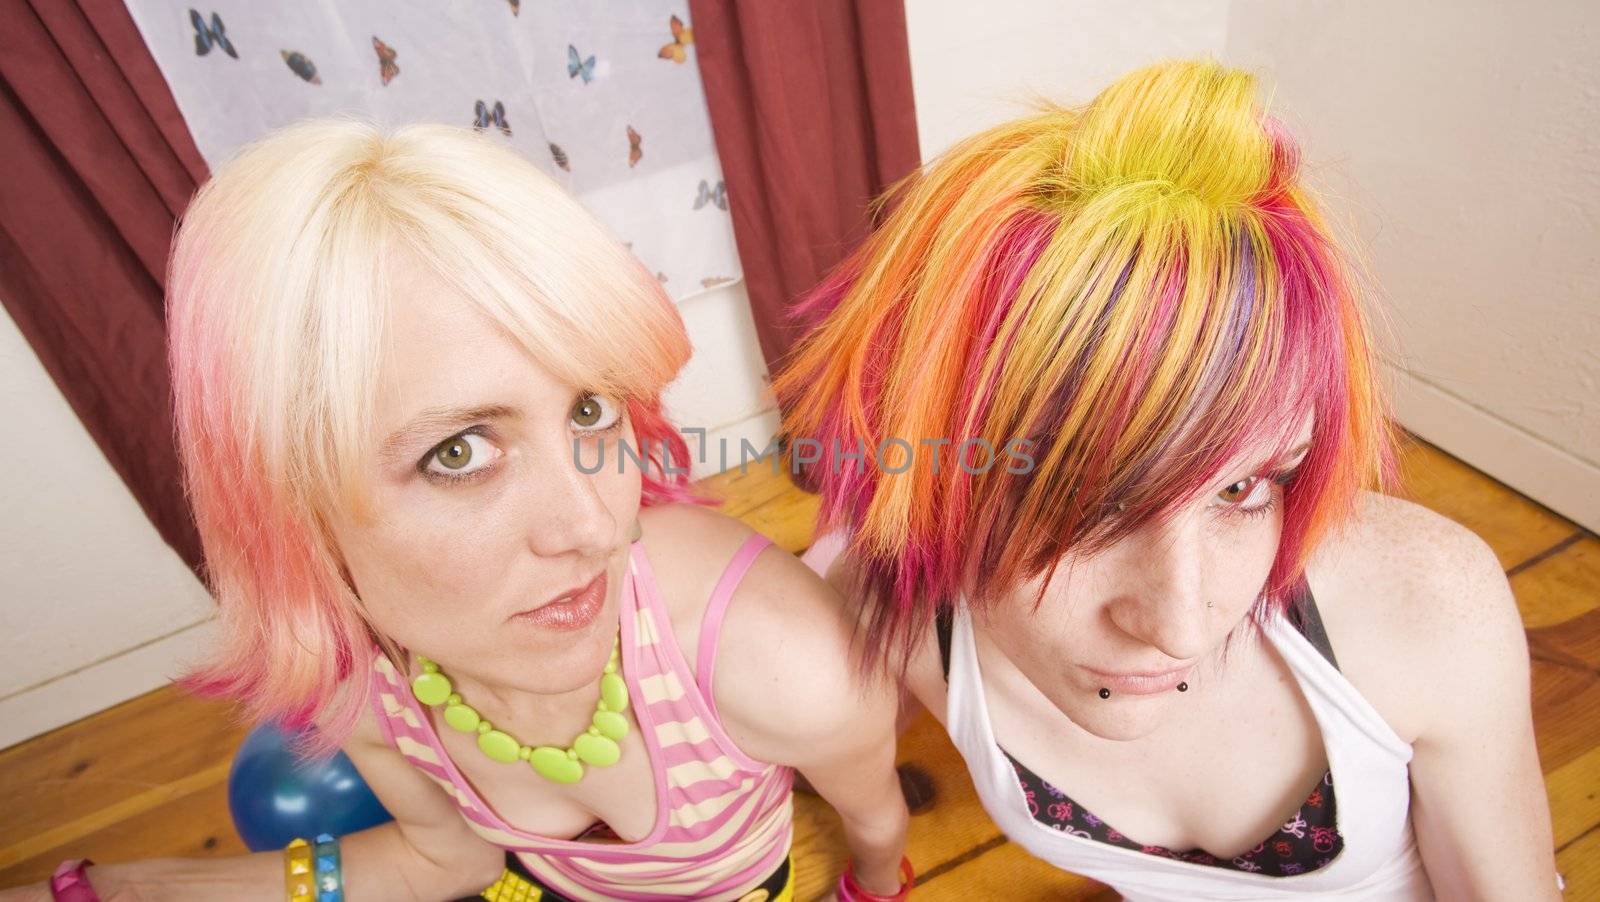 Two colorful hipster girls with brightly dyed hair